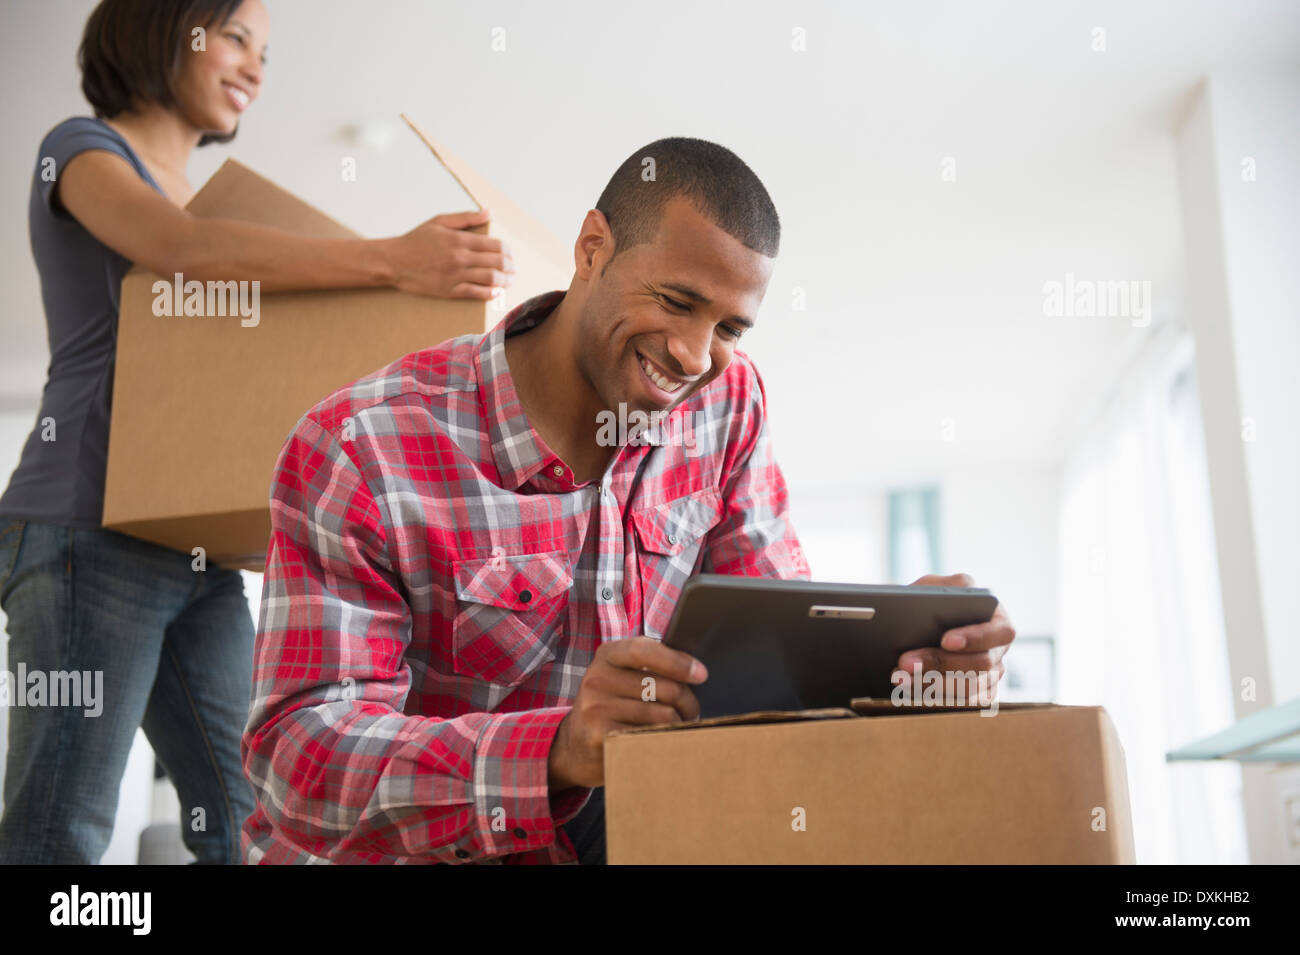 Couple with digital tablet and moving boxes Stock Photo